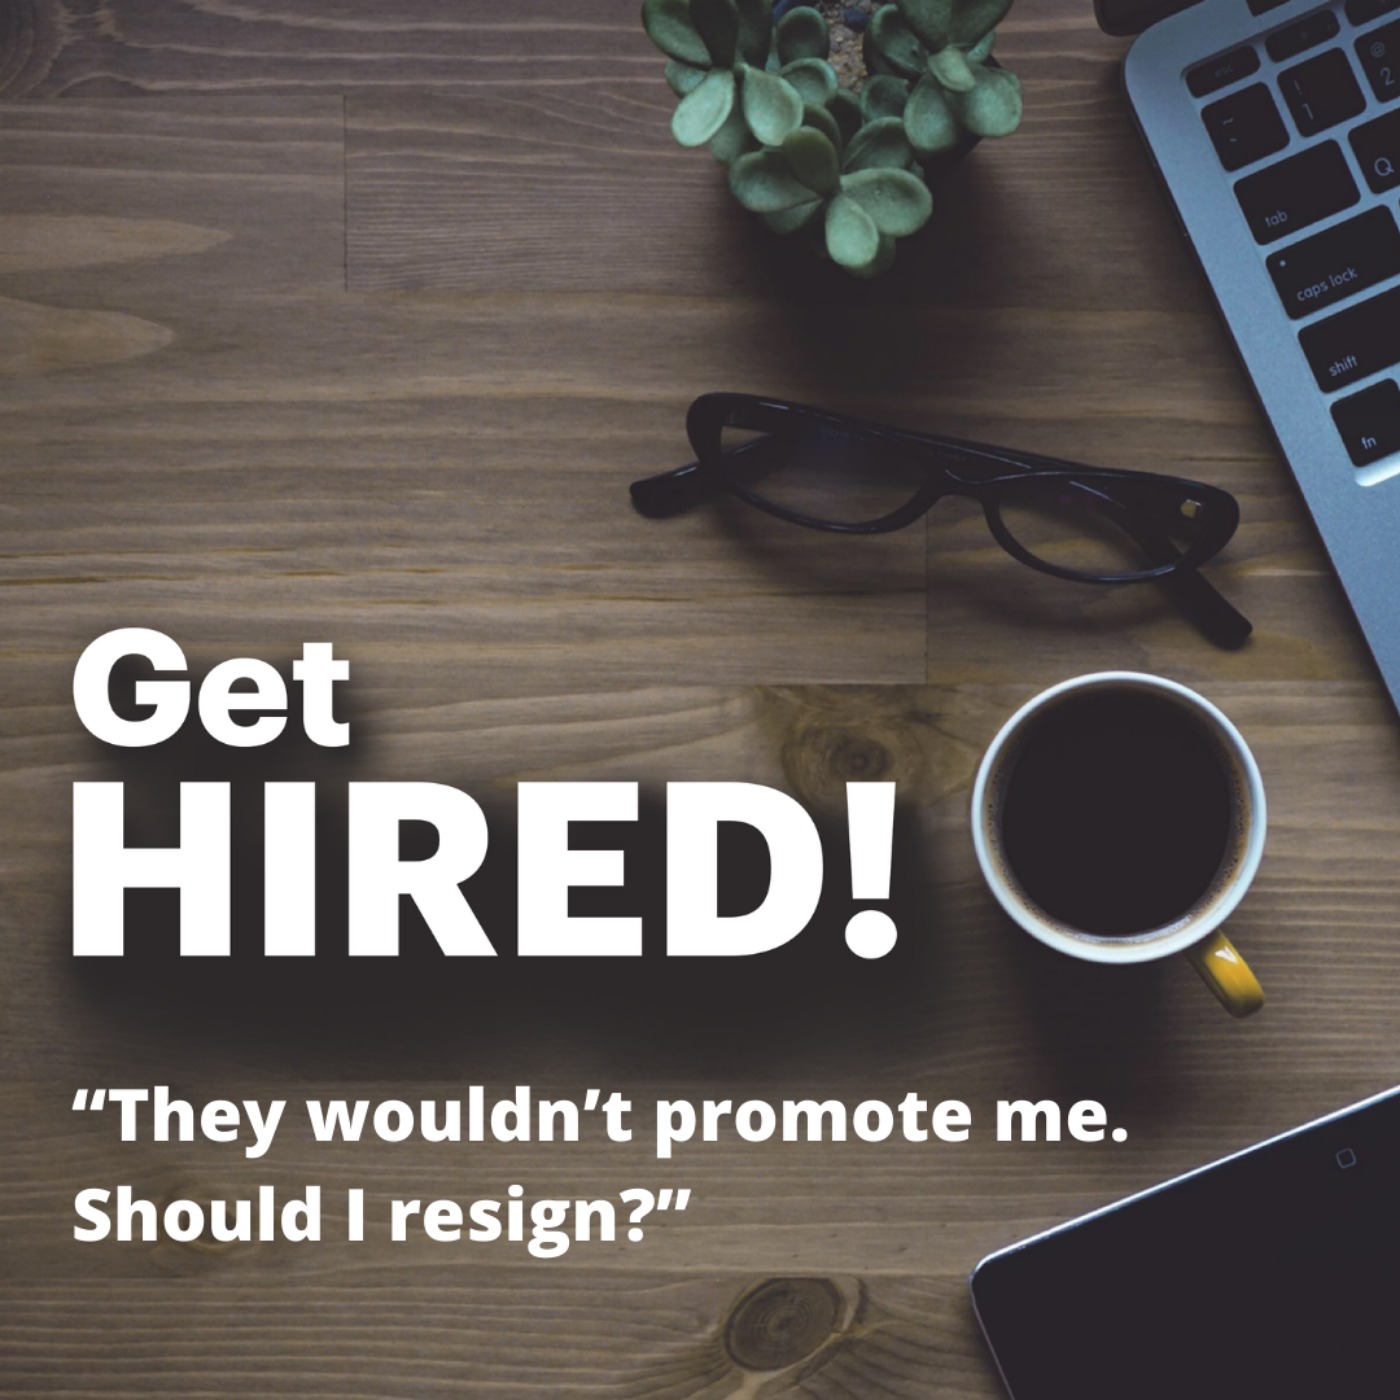 Get Hired: “They wouldn’t promote me. Should I resign?”